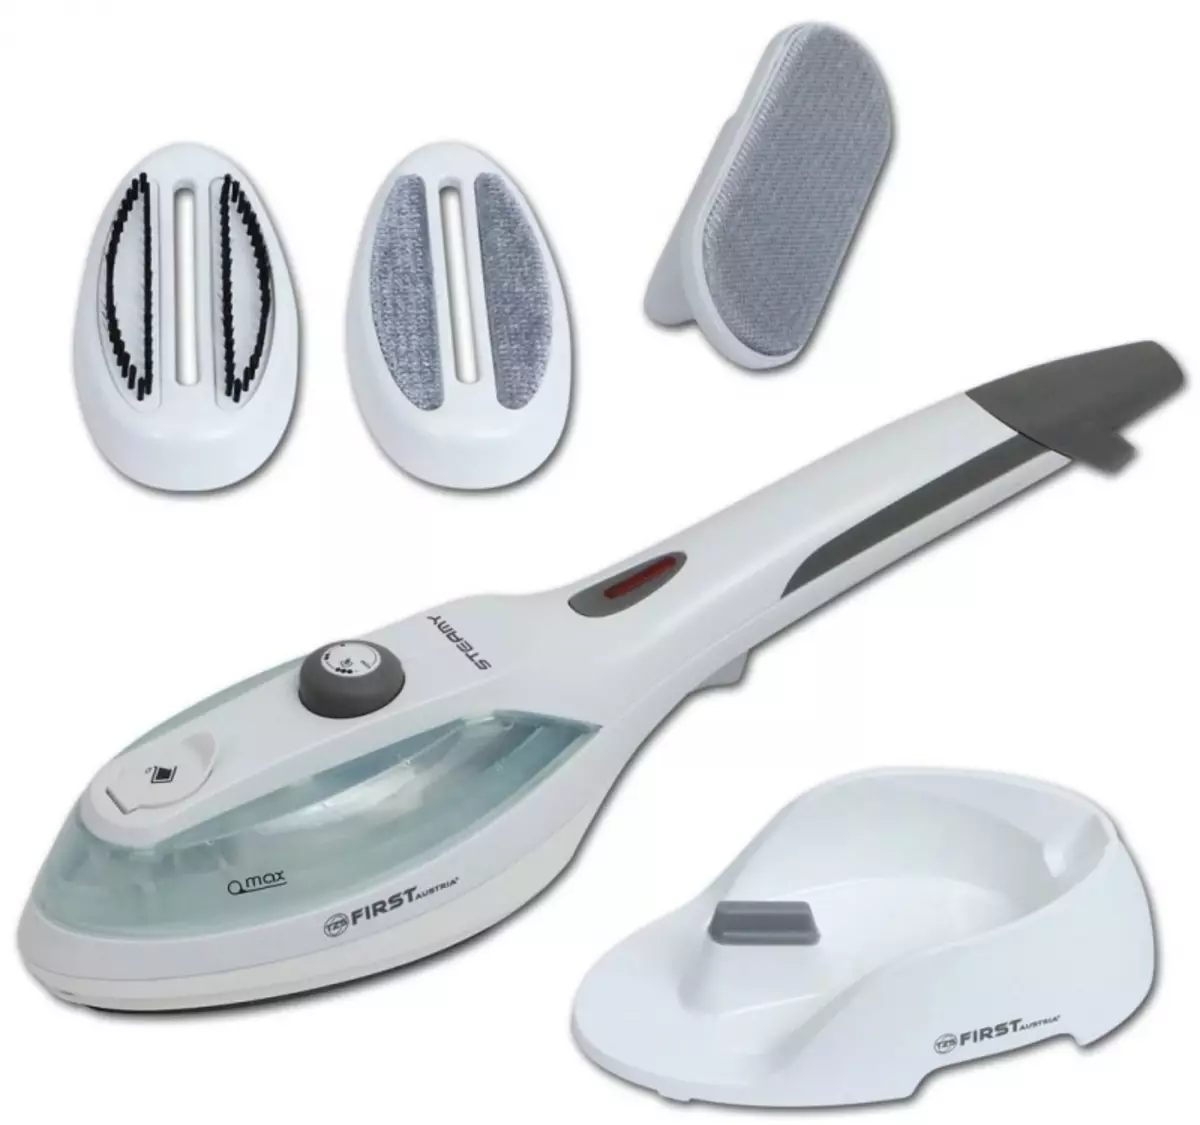 Steaming: Choose a steam iron for ironing clothes and floor hanger for evaporation of fur coats and dresses. How to use them? 21916_28